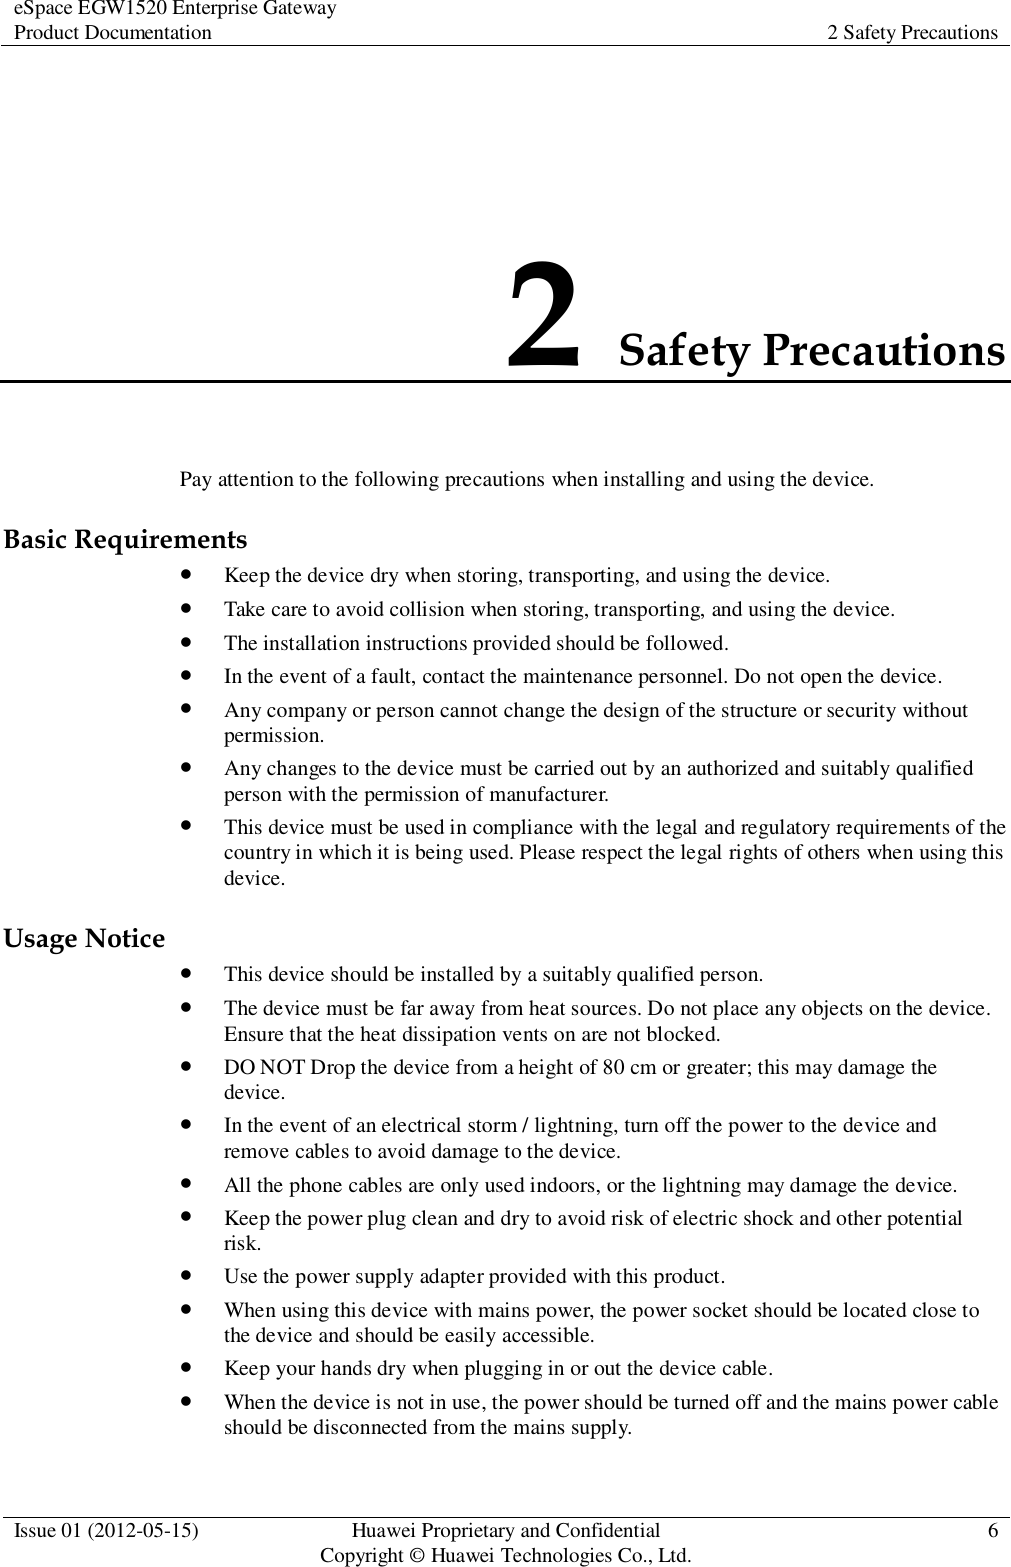 eSpace EGW1520 Enterprise Gateway Product Documentation 2 Safety Precautions  Issue 01 (2012-05-15) Huawei Proprietary and Confidential                                     Copyright © Huawei Technologies Co., Ltd. 6  2 Safety Precautions Pay attention to the following precautions when installing and using the device. Basic Requirements  Keep the device dry when storing, transporting, and using the device.  Take care to avoid collision when storing, transporting, and using the device.  The installation instructions provided should be followed.  In the event of a fault, contact the maintenance personnel. Do not open the device.  Any company or person cannot change the design of the structure or security without permission.  Any changes to the device must be carried out by an authorized and suitably qualified person with the permission of manufacturer.  This device must be used in compliance with the legal and regulatory requirements of the country in which it is being used. Please respect the legal rights of others when using this device. Usage Notice  This device should be installed by a suitably qualified person.  The device must be far away from heat sources. Do not place any objects on the device. Ensure that the heat dissipation vents on are not blocked.  DO NOT Drop the device from a height of 80 cm or greater; this may damage the device.  In the event of an electrical storm / lightning, turn off the power to the device and remove cables to avoid damage to the device.  All the phone cables are only used indoors, or the lightning may damage the device.  Keep the power plug clean and dry to avoid risk of electric shock and other potential risk.  Use the power supply adapter provided with this product.  When using this device with mains power, the power socket should be located close to the device and should be easily accessible.  Keep your hands dry when plugging in or out the device cable.  When the device is not in use, the power should be turned off and the mains power cable should be disconnected from the mains supply. 